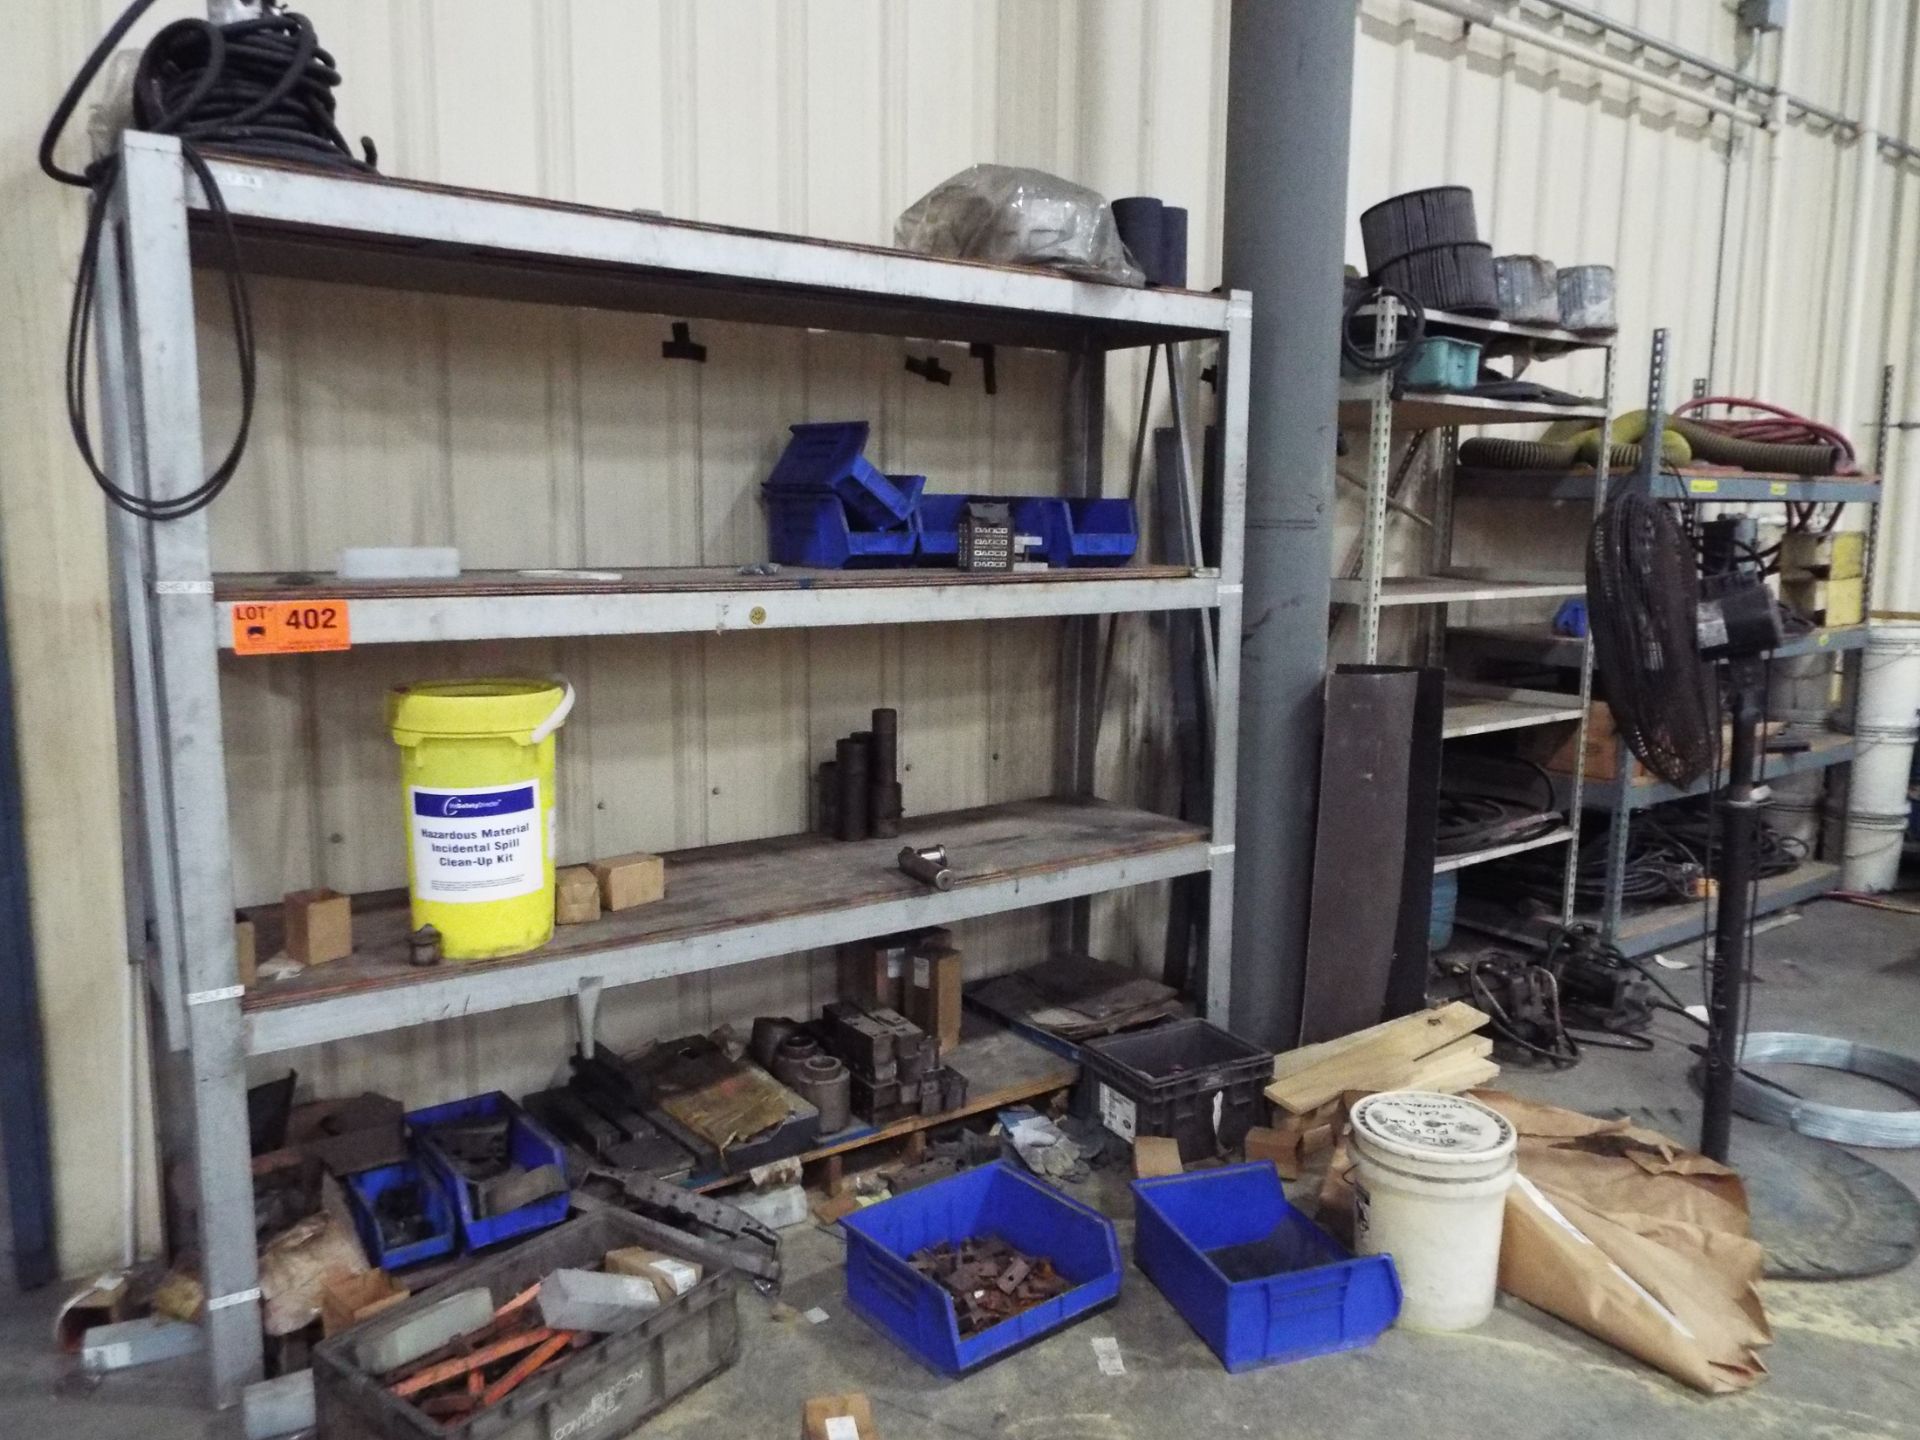 LOT/ SHELVES WITH CONTENTS - BELTS, HIGH VOLTAGE CABLES, PNEUMATIC HOSE, FILTERS, SPARE PARTS